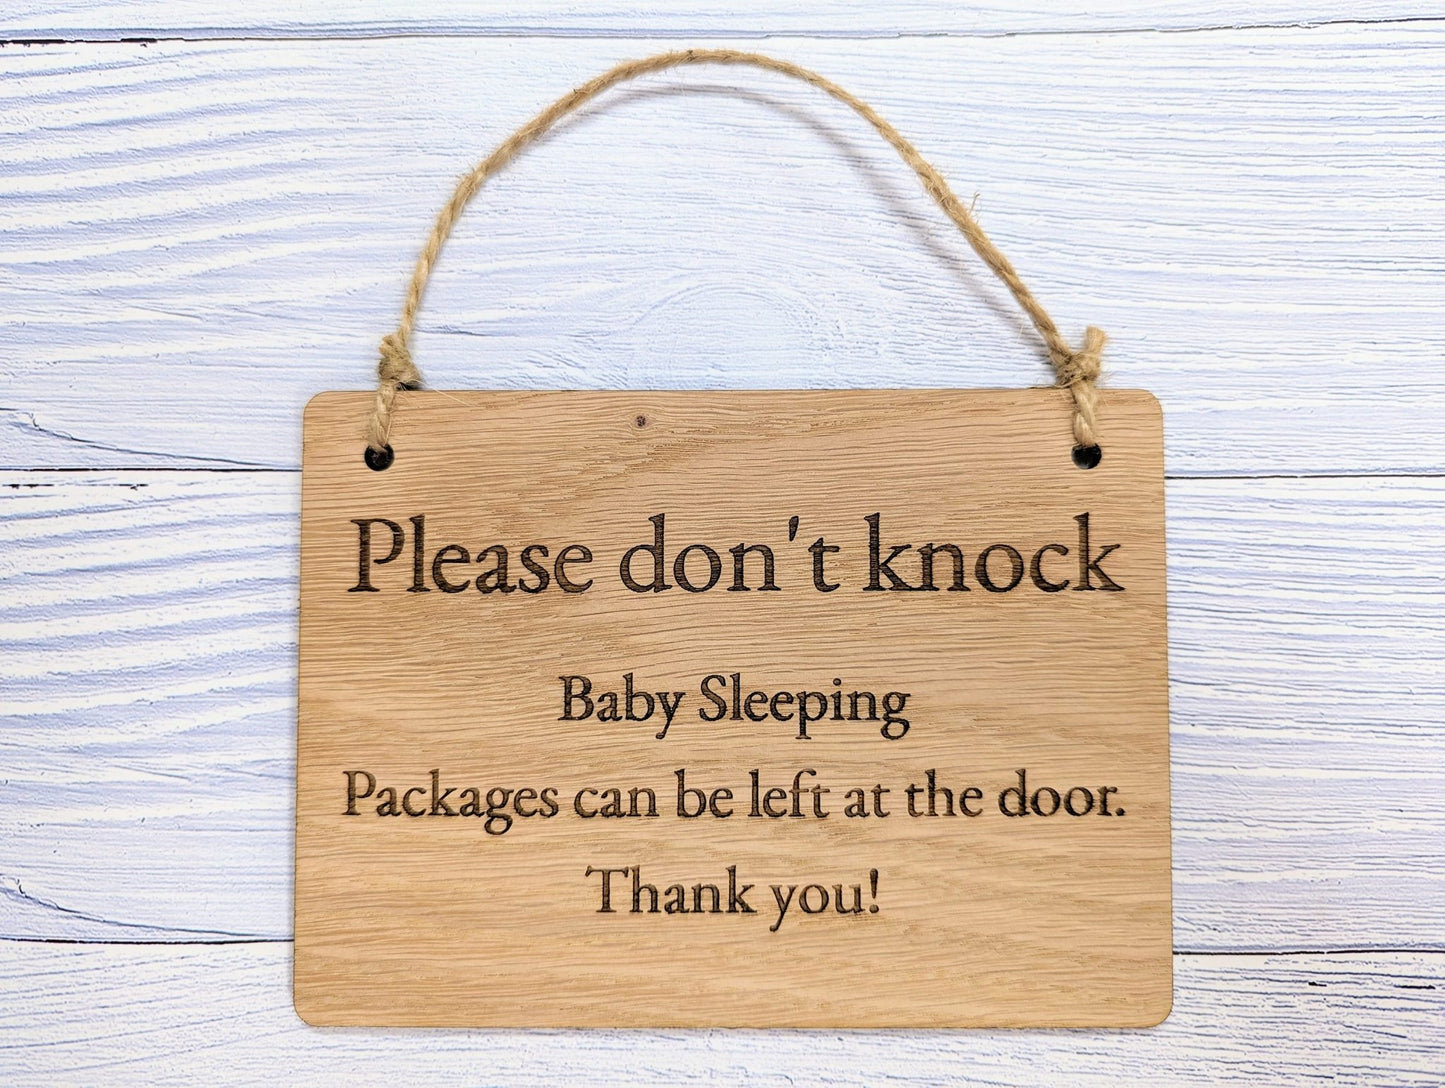 Please Don't Knock, Baby Sleeping" Wooden Sign - Ideal for Homes with Newborns, Night Shift Workers - Oak Veneered MDF - Customisable Text - CherryGroveCraft